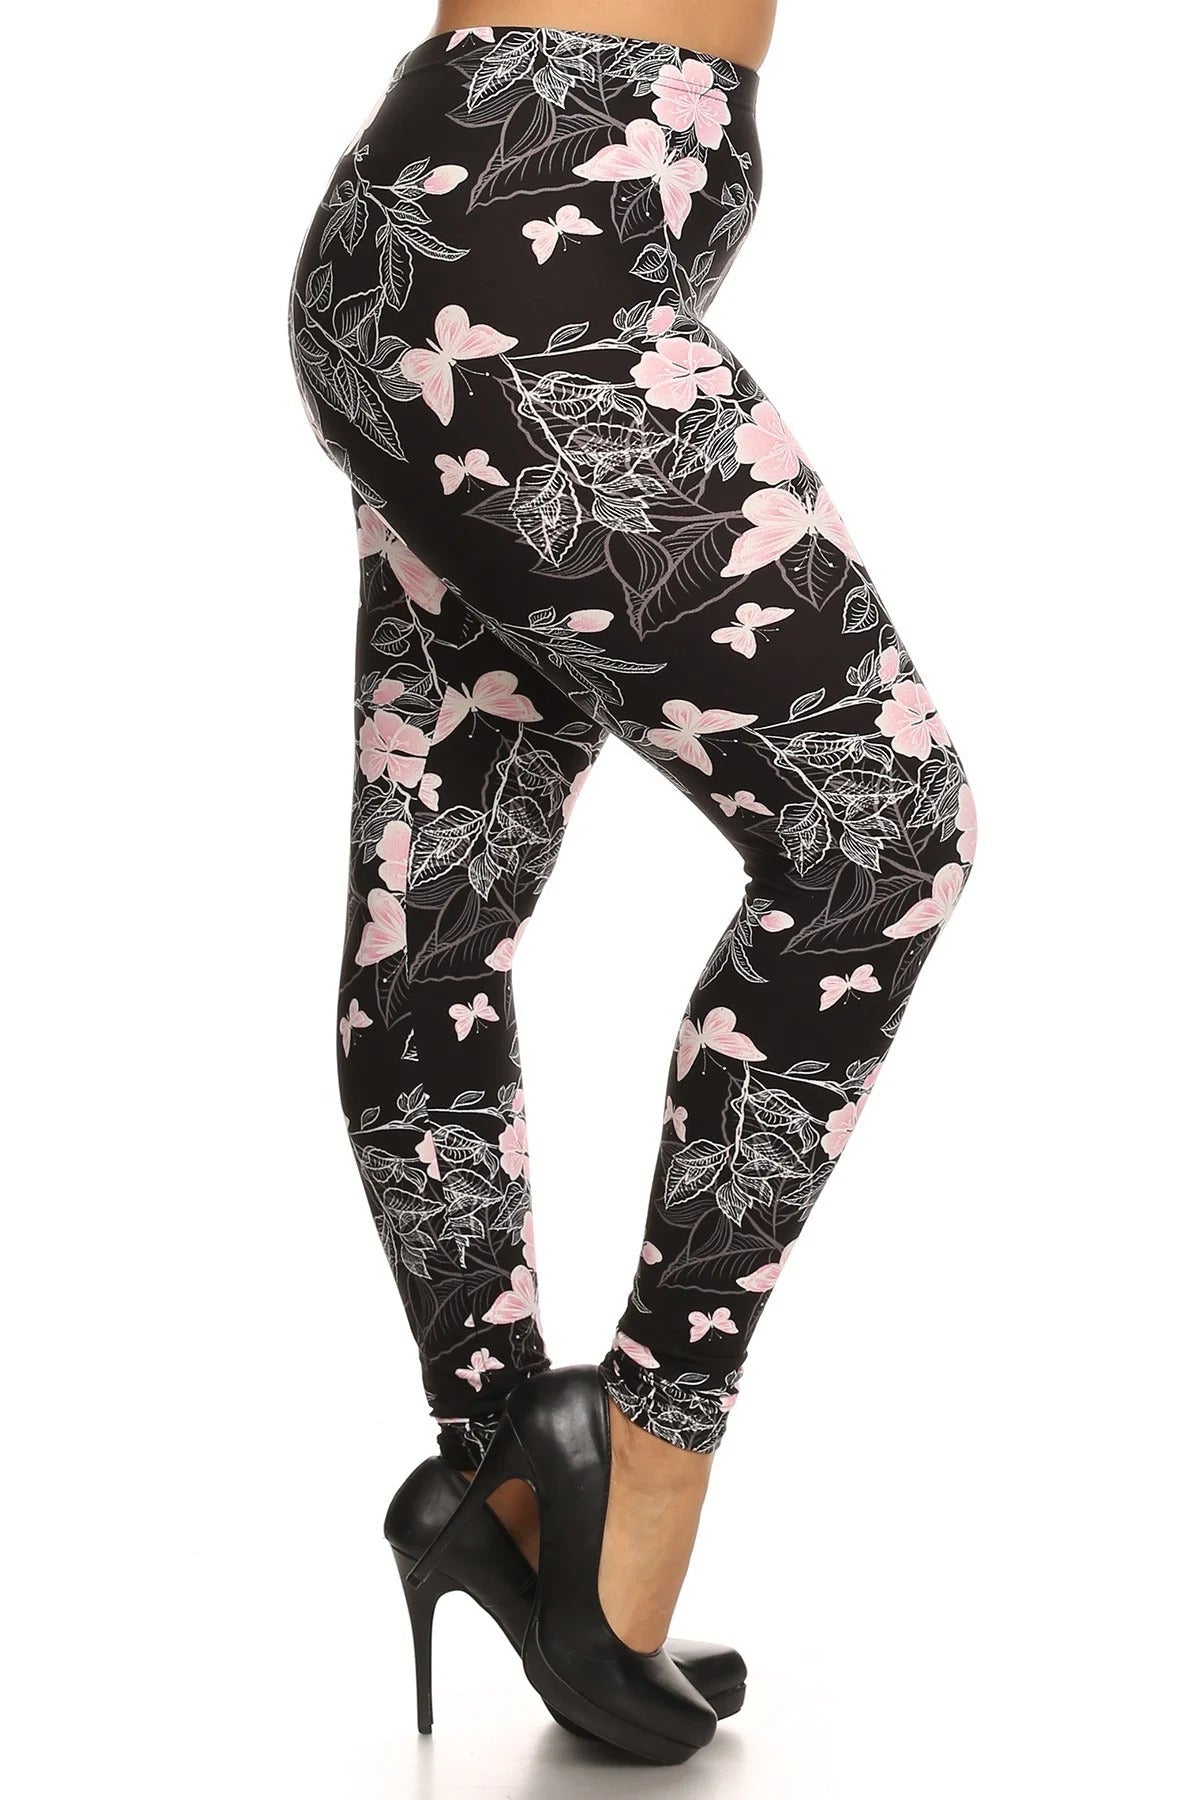 Plus Size Super Soft Peach Skin Fabric, Butterfly Graphic Printed Knit Legging With Elastic Waist Detail Smile Sparker